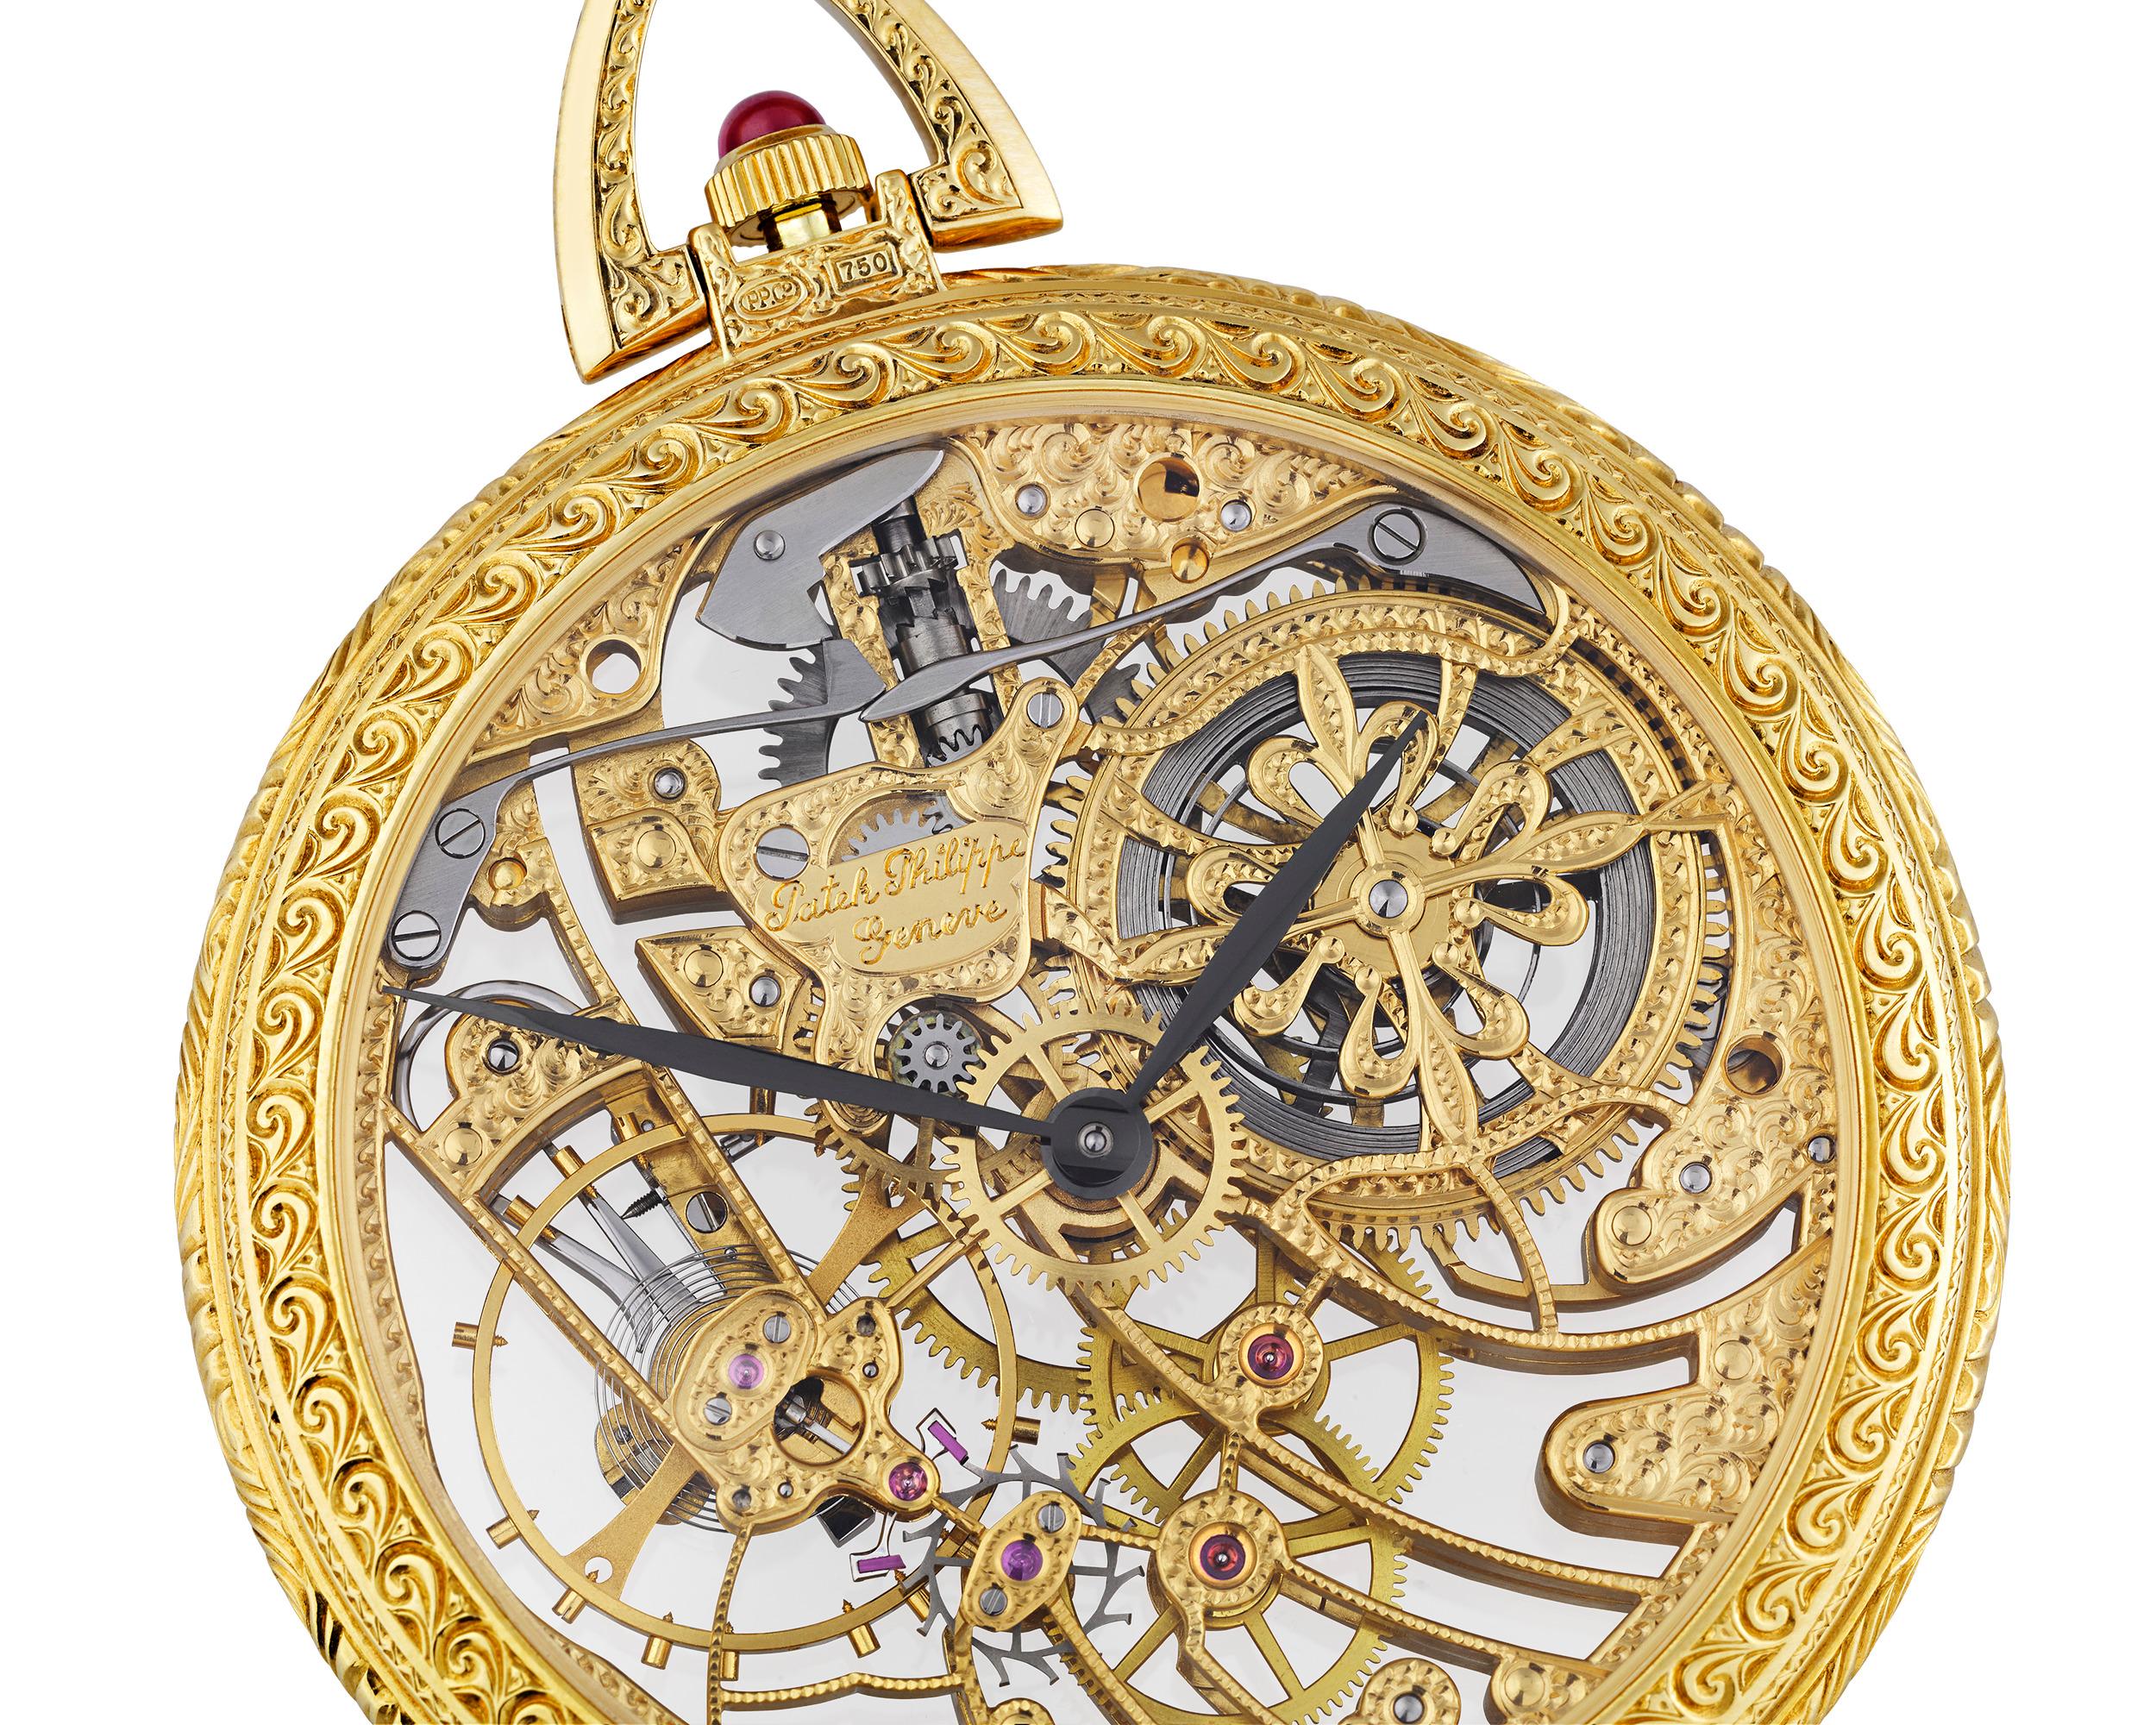 The perfect marriage of precision timekeeping and aesthetic appeal, this ref. 894 skeletonized pocket watch by Patek Philippe is in a class all its own. Known as the Squelette, French for “skeleton,